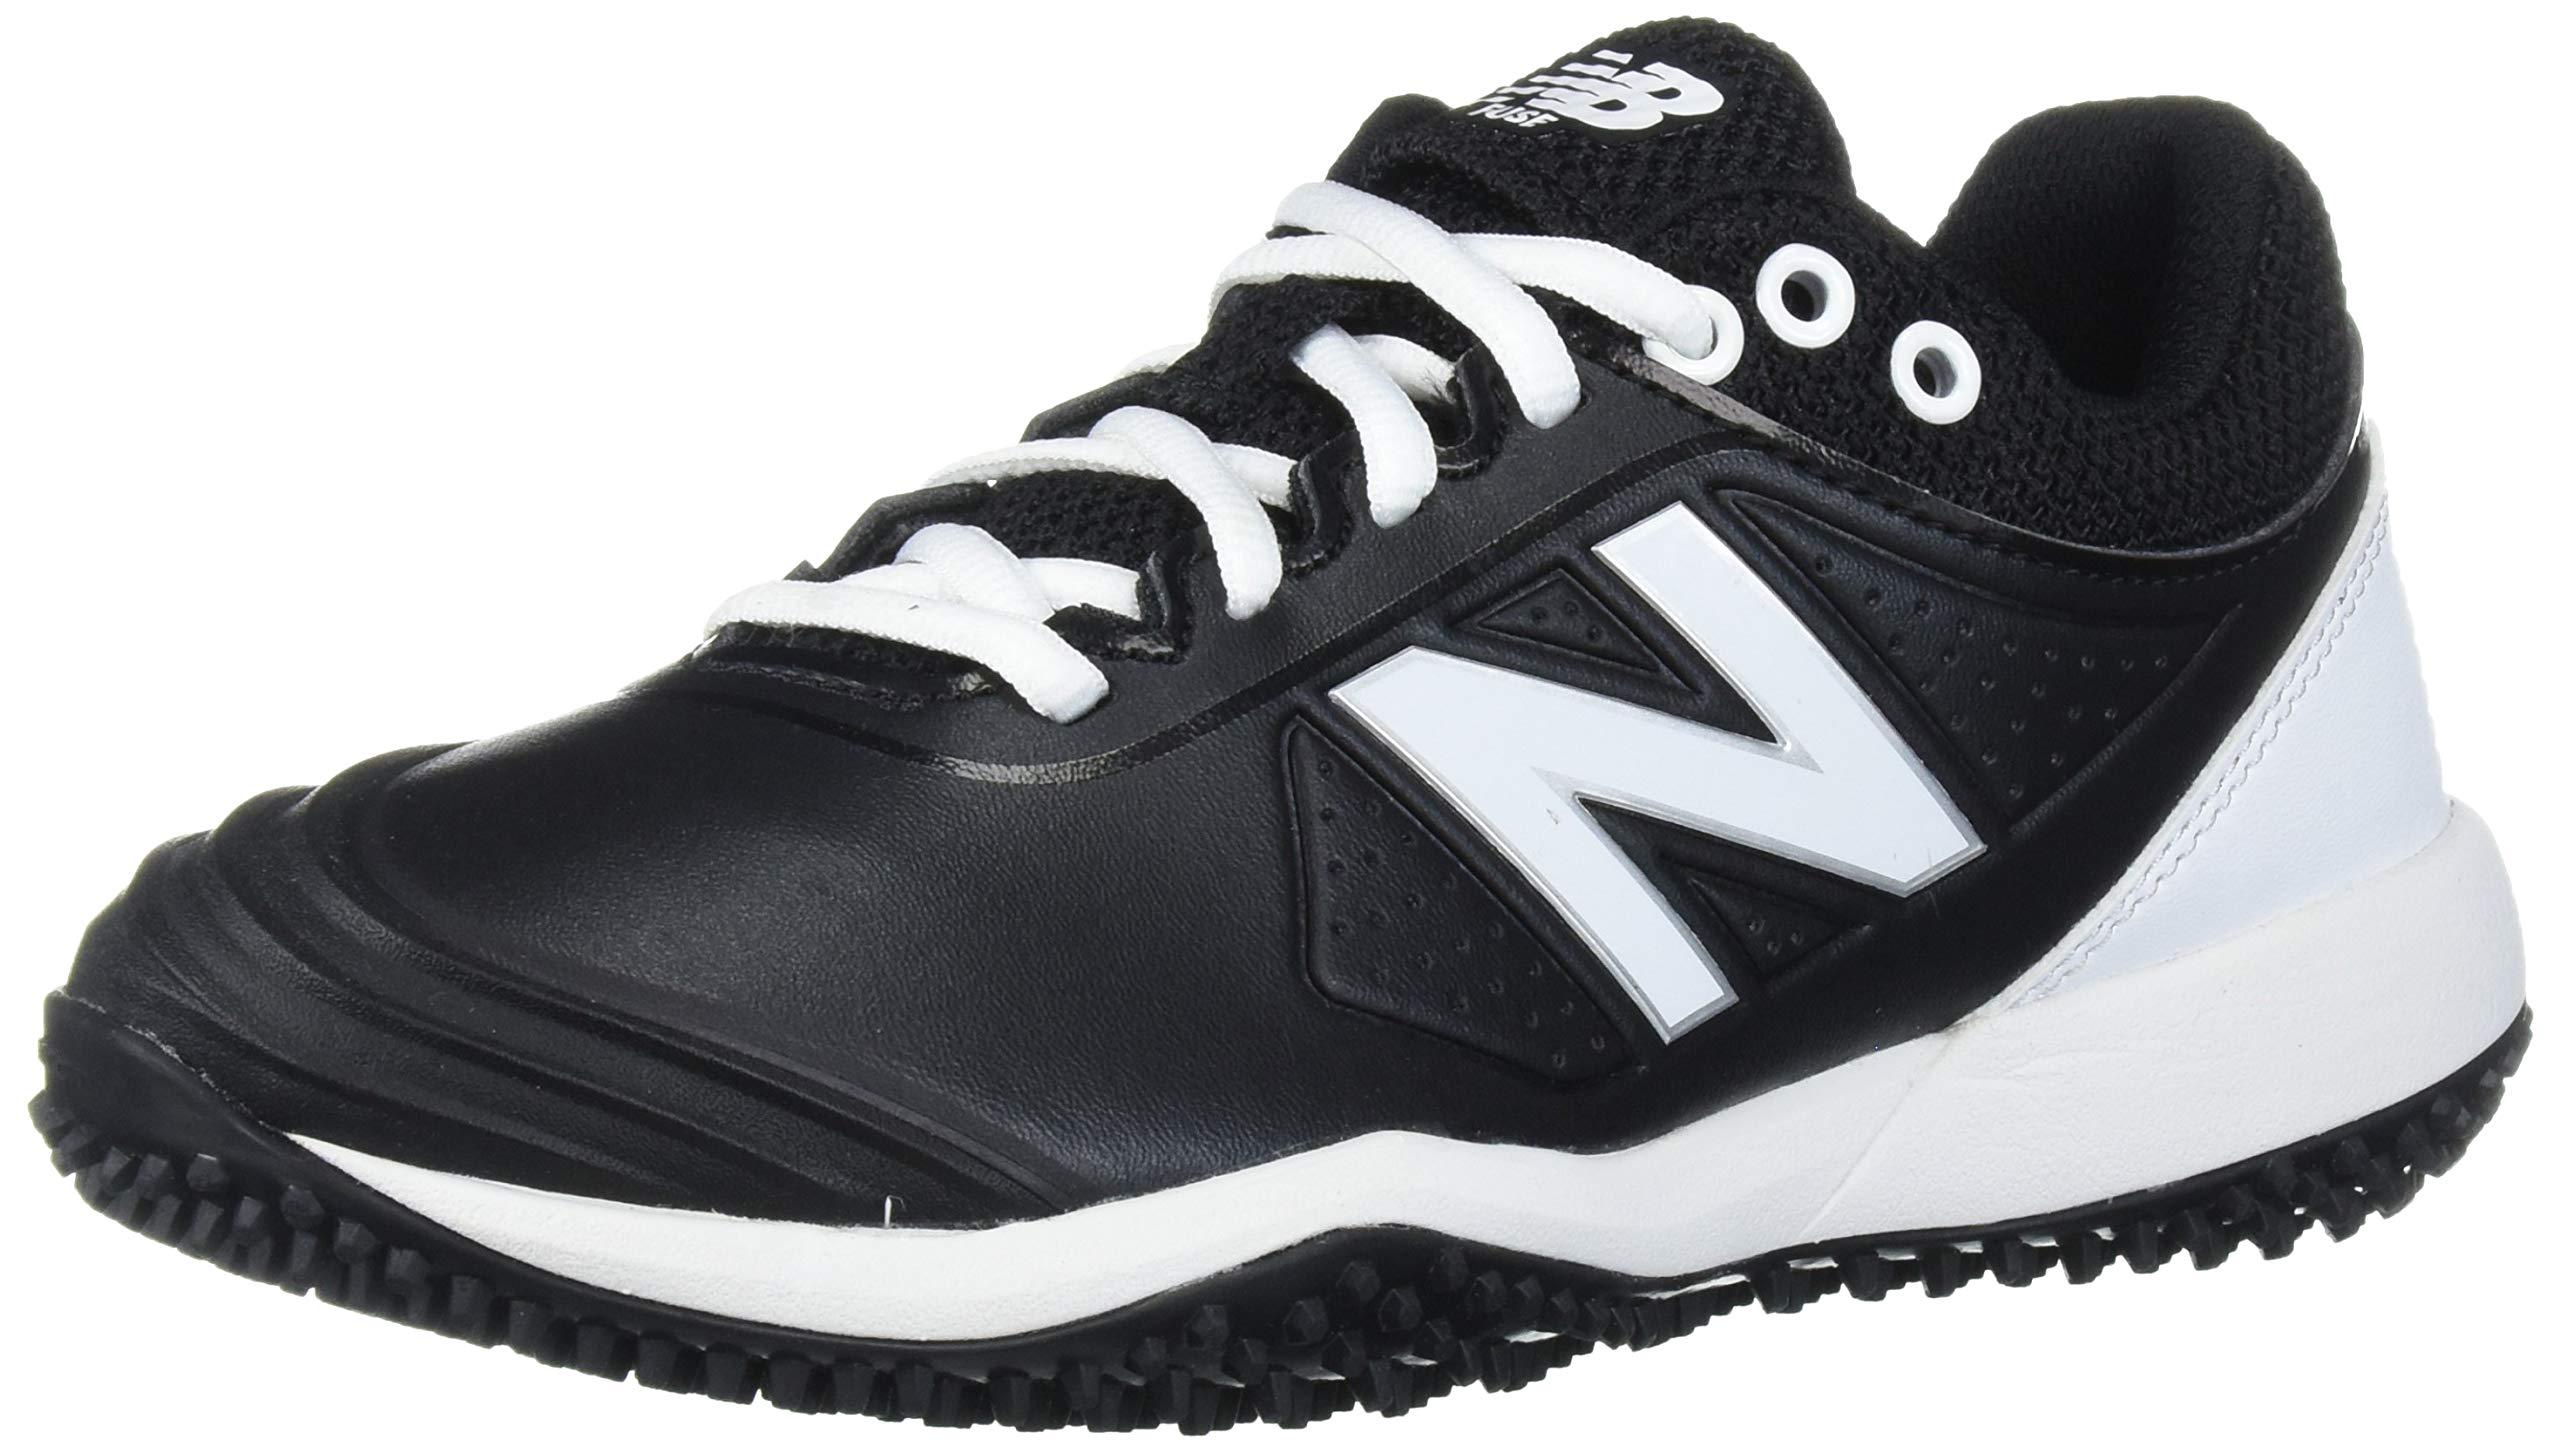 New Balance Synthetic Fuse V2 Turf in Black/White (Black) - Lyst